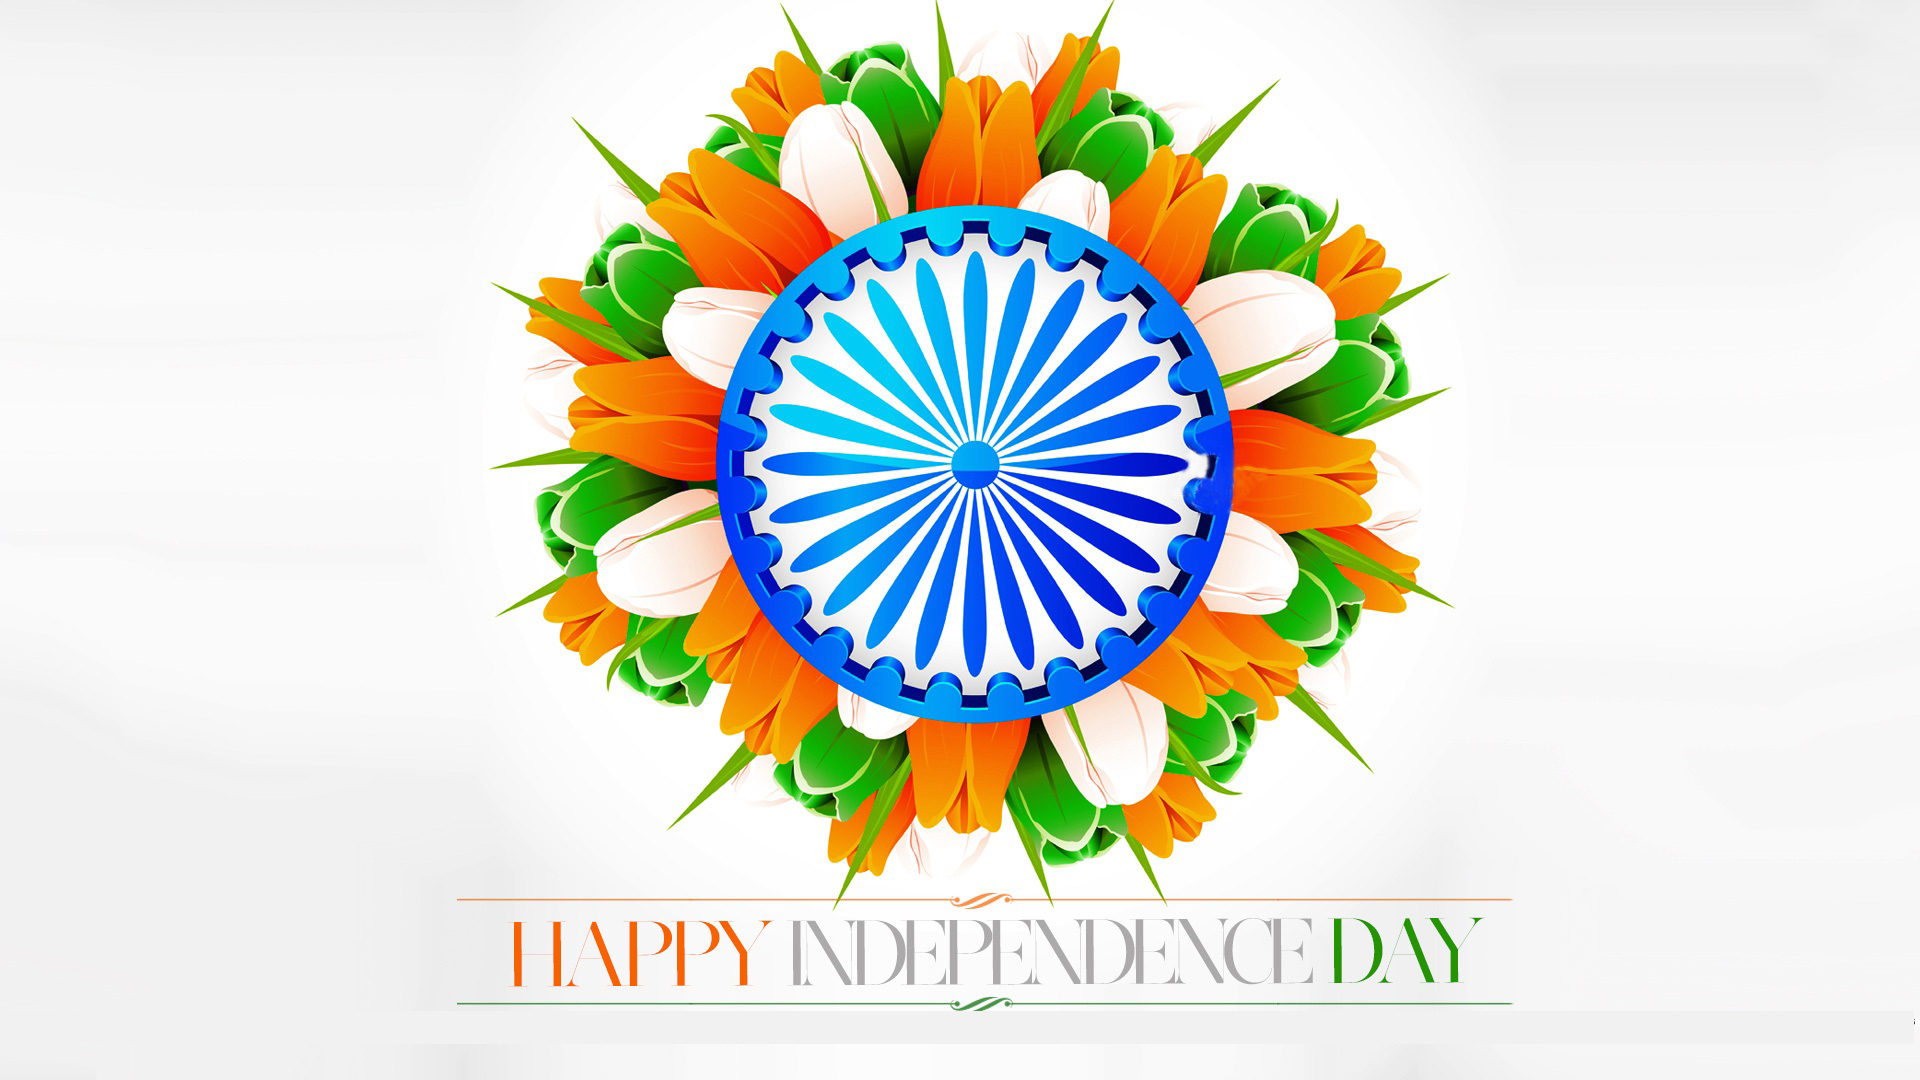 Happy Independence Day salute india flag hd images